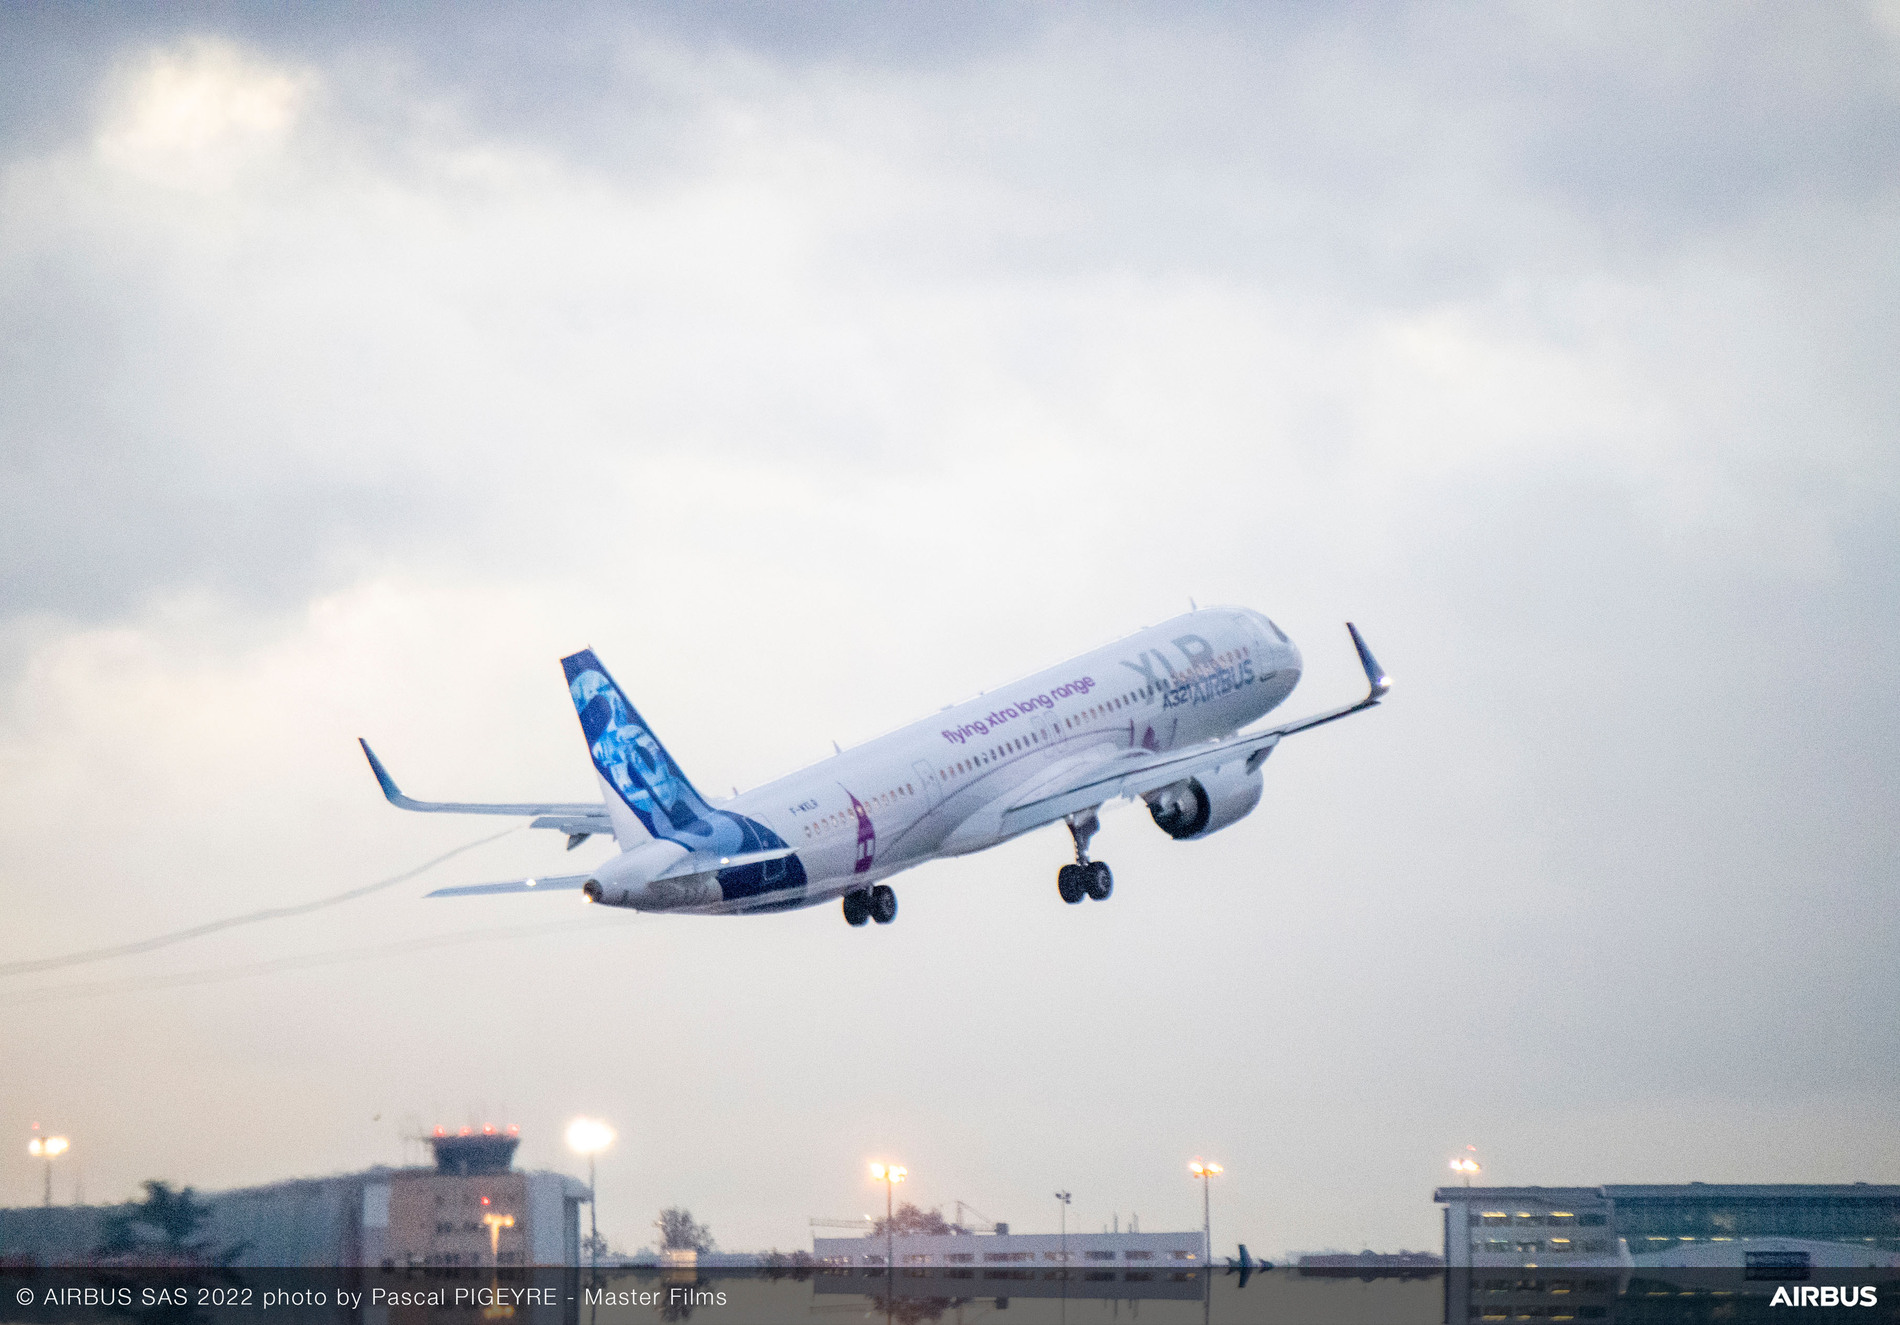 Airbus releases its Global Market Forecast